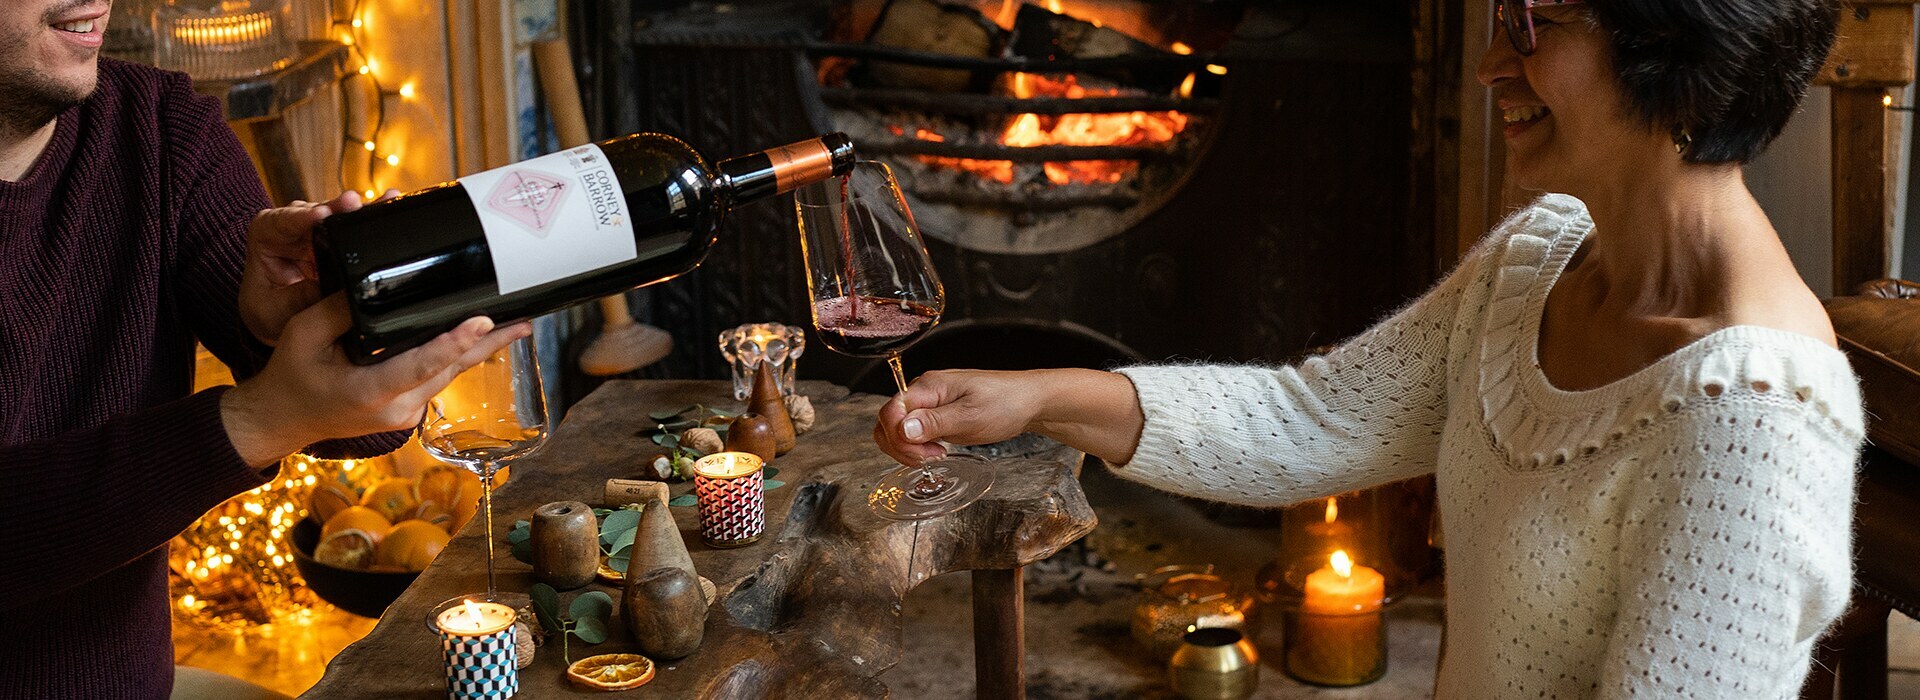 FIREPLACE, MAGNUM POURING WINE INTO GLASS